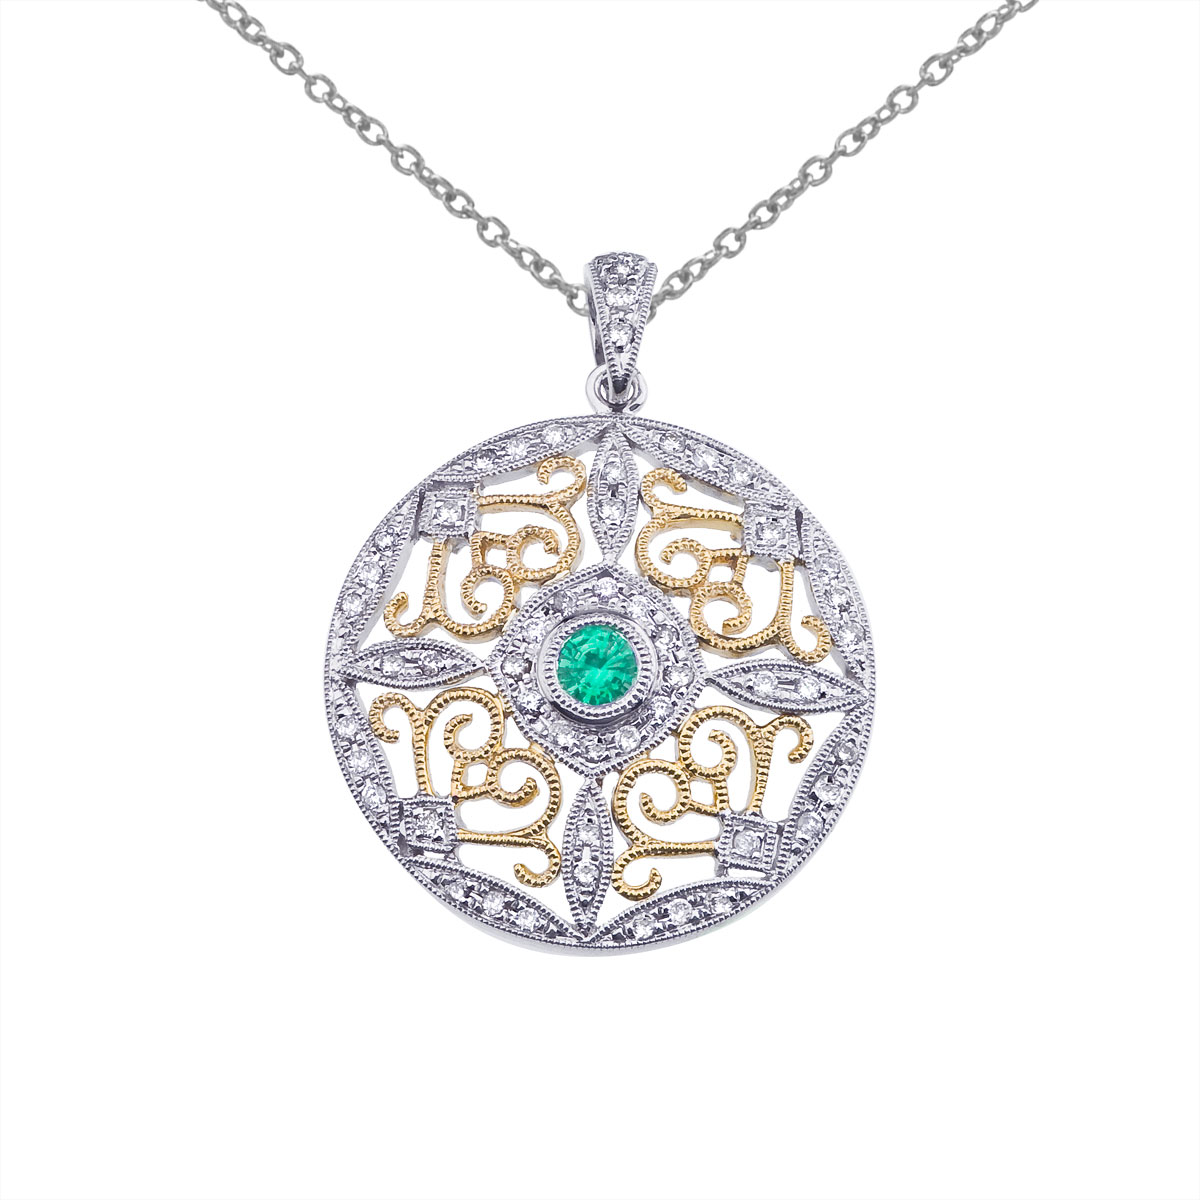 JCX2584: This pendant features a beautiful and intricate 14k two tone gold filigree design with a 4 mm emerald and .31 total ct diamonds.